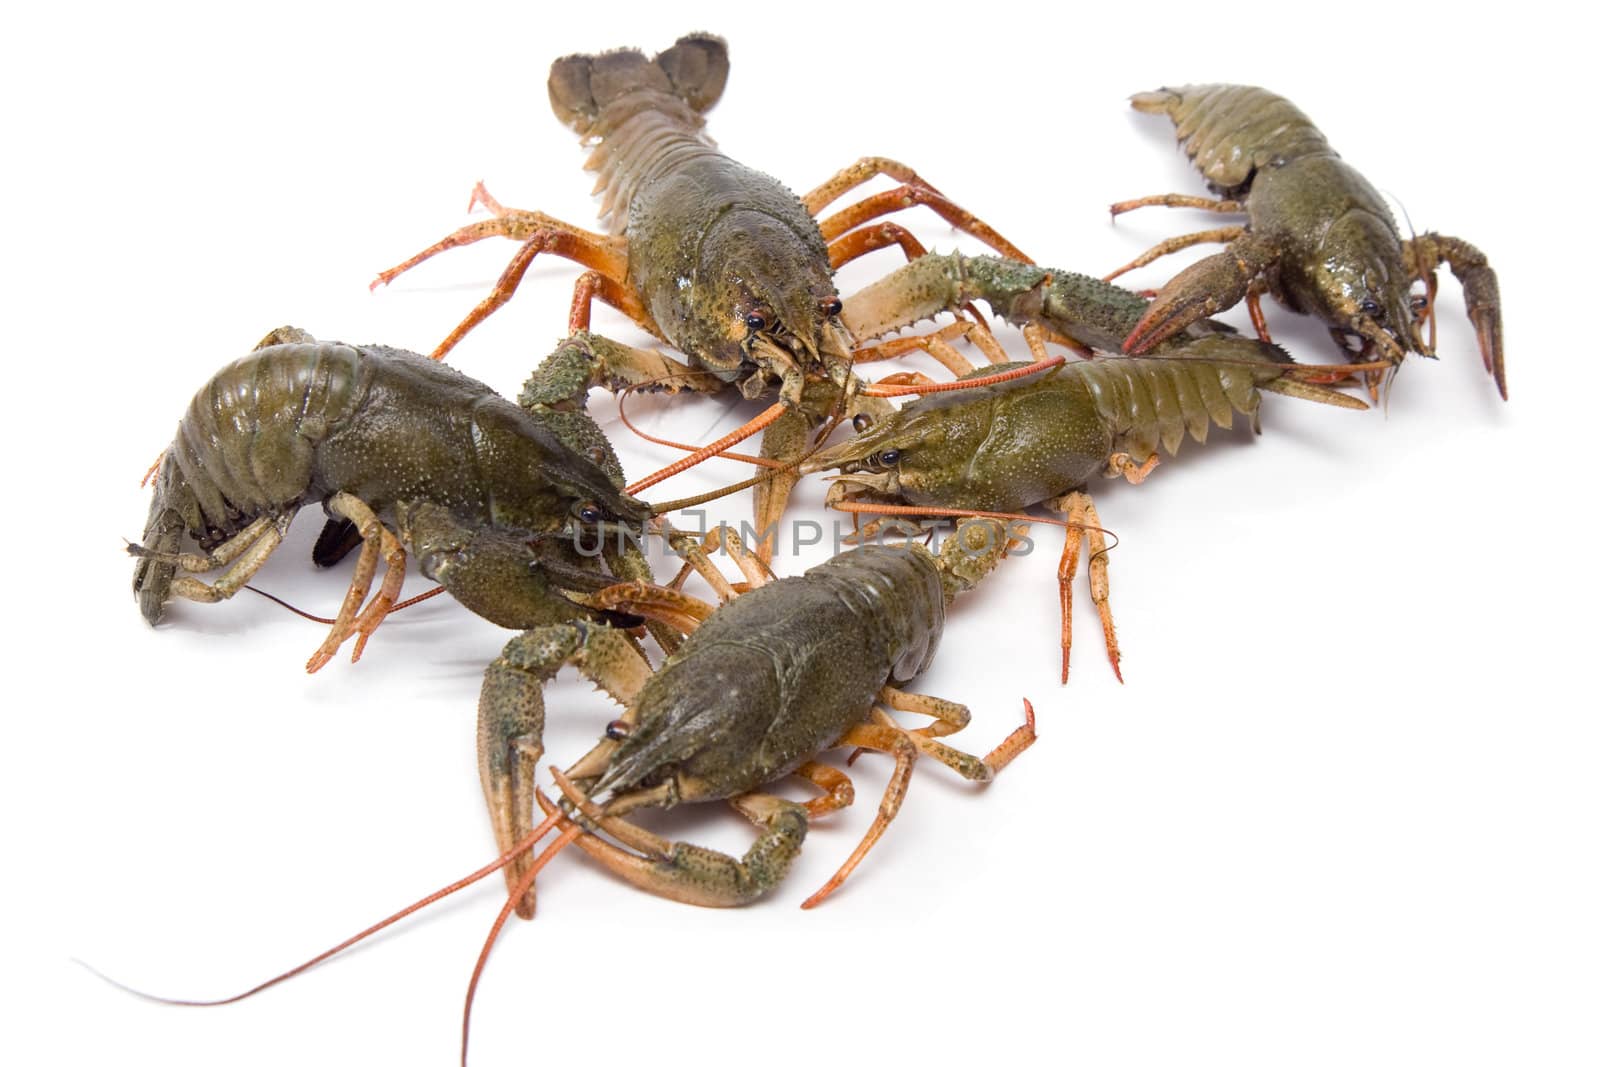 Five live crawfish on a white background